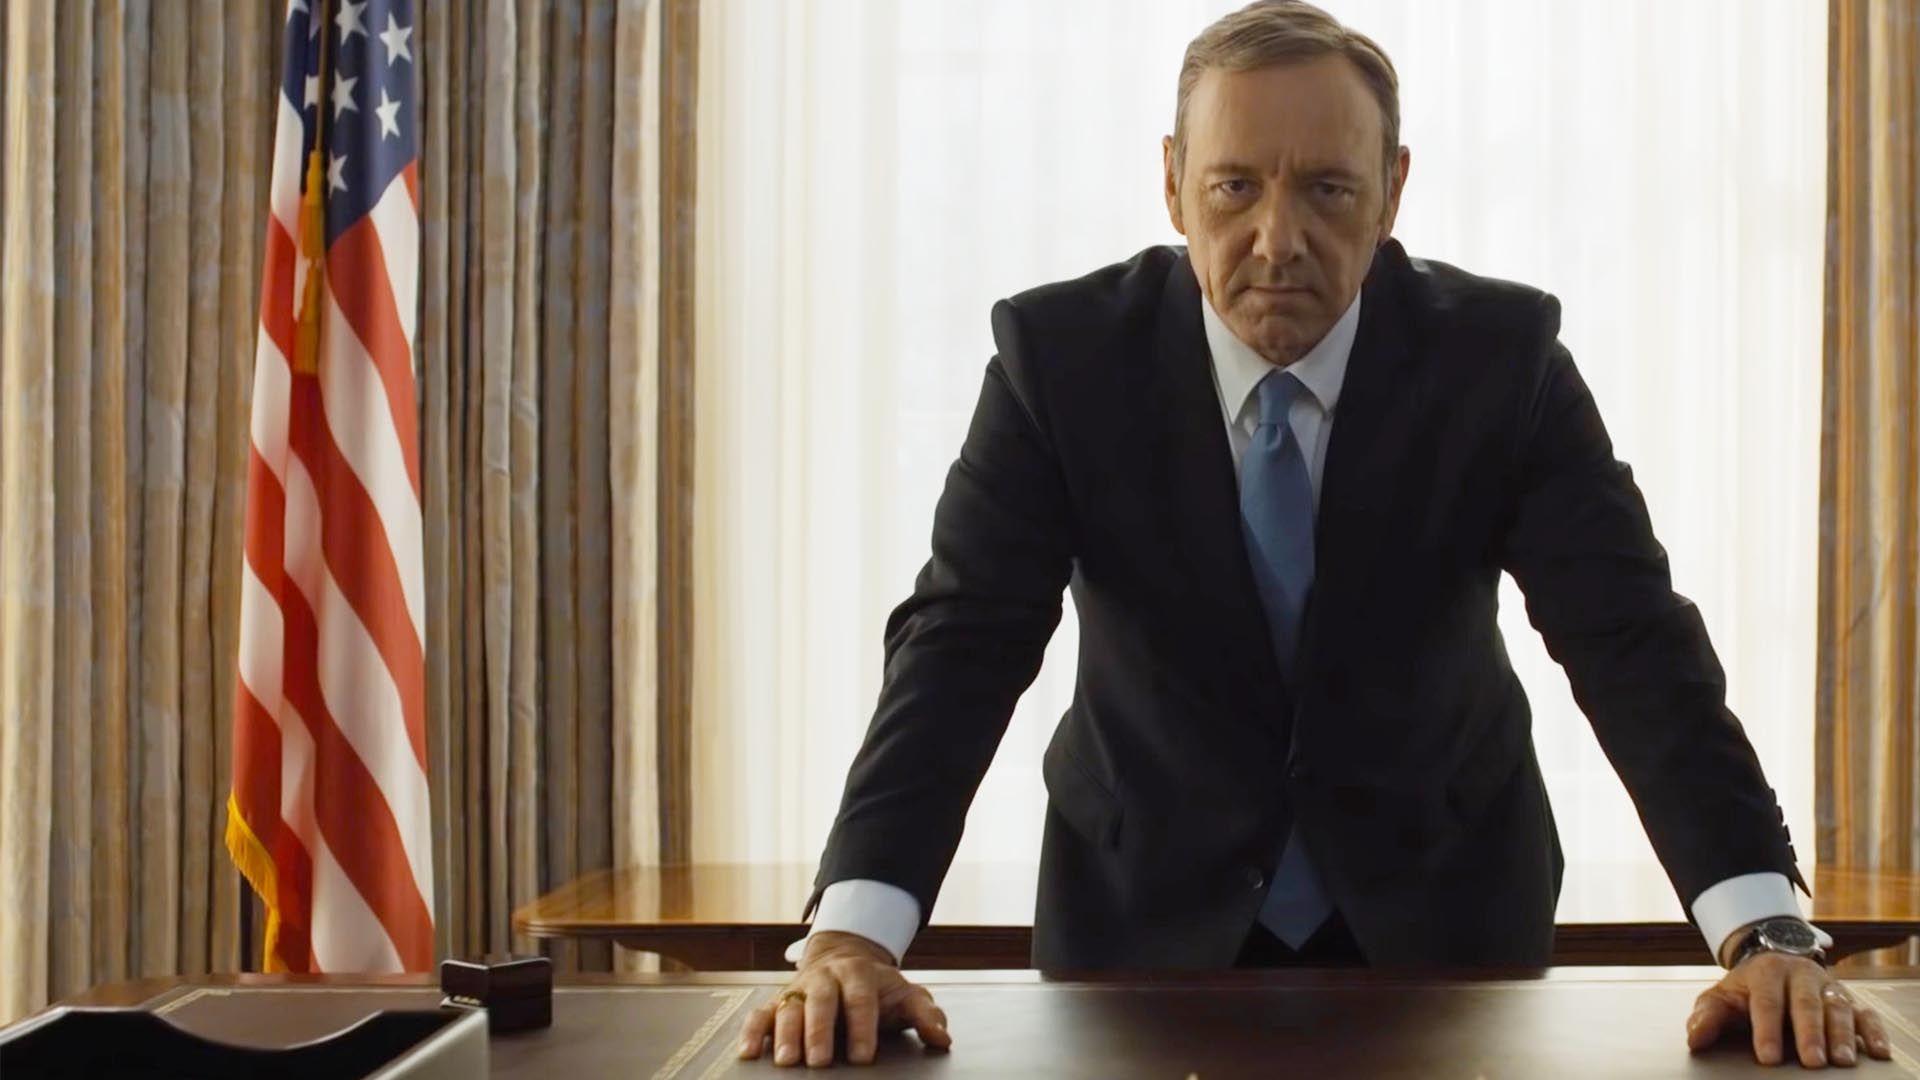 House Of Cards' Producers Admit Kevin Spacey “Incident” On Netflix